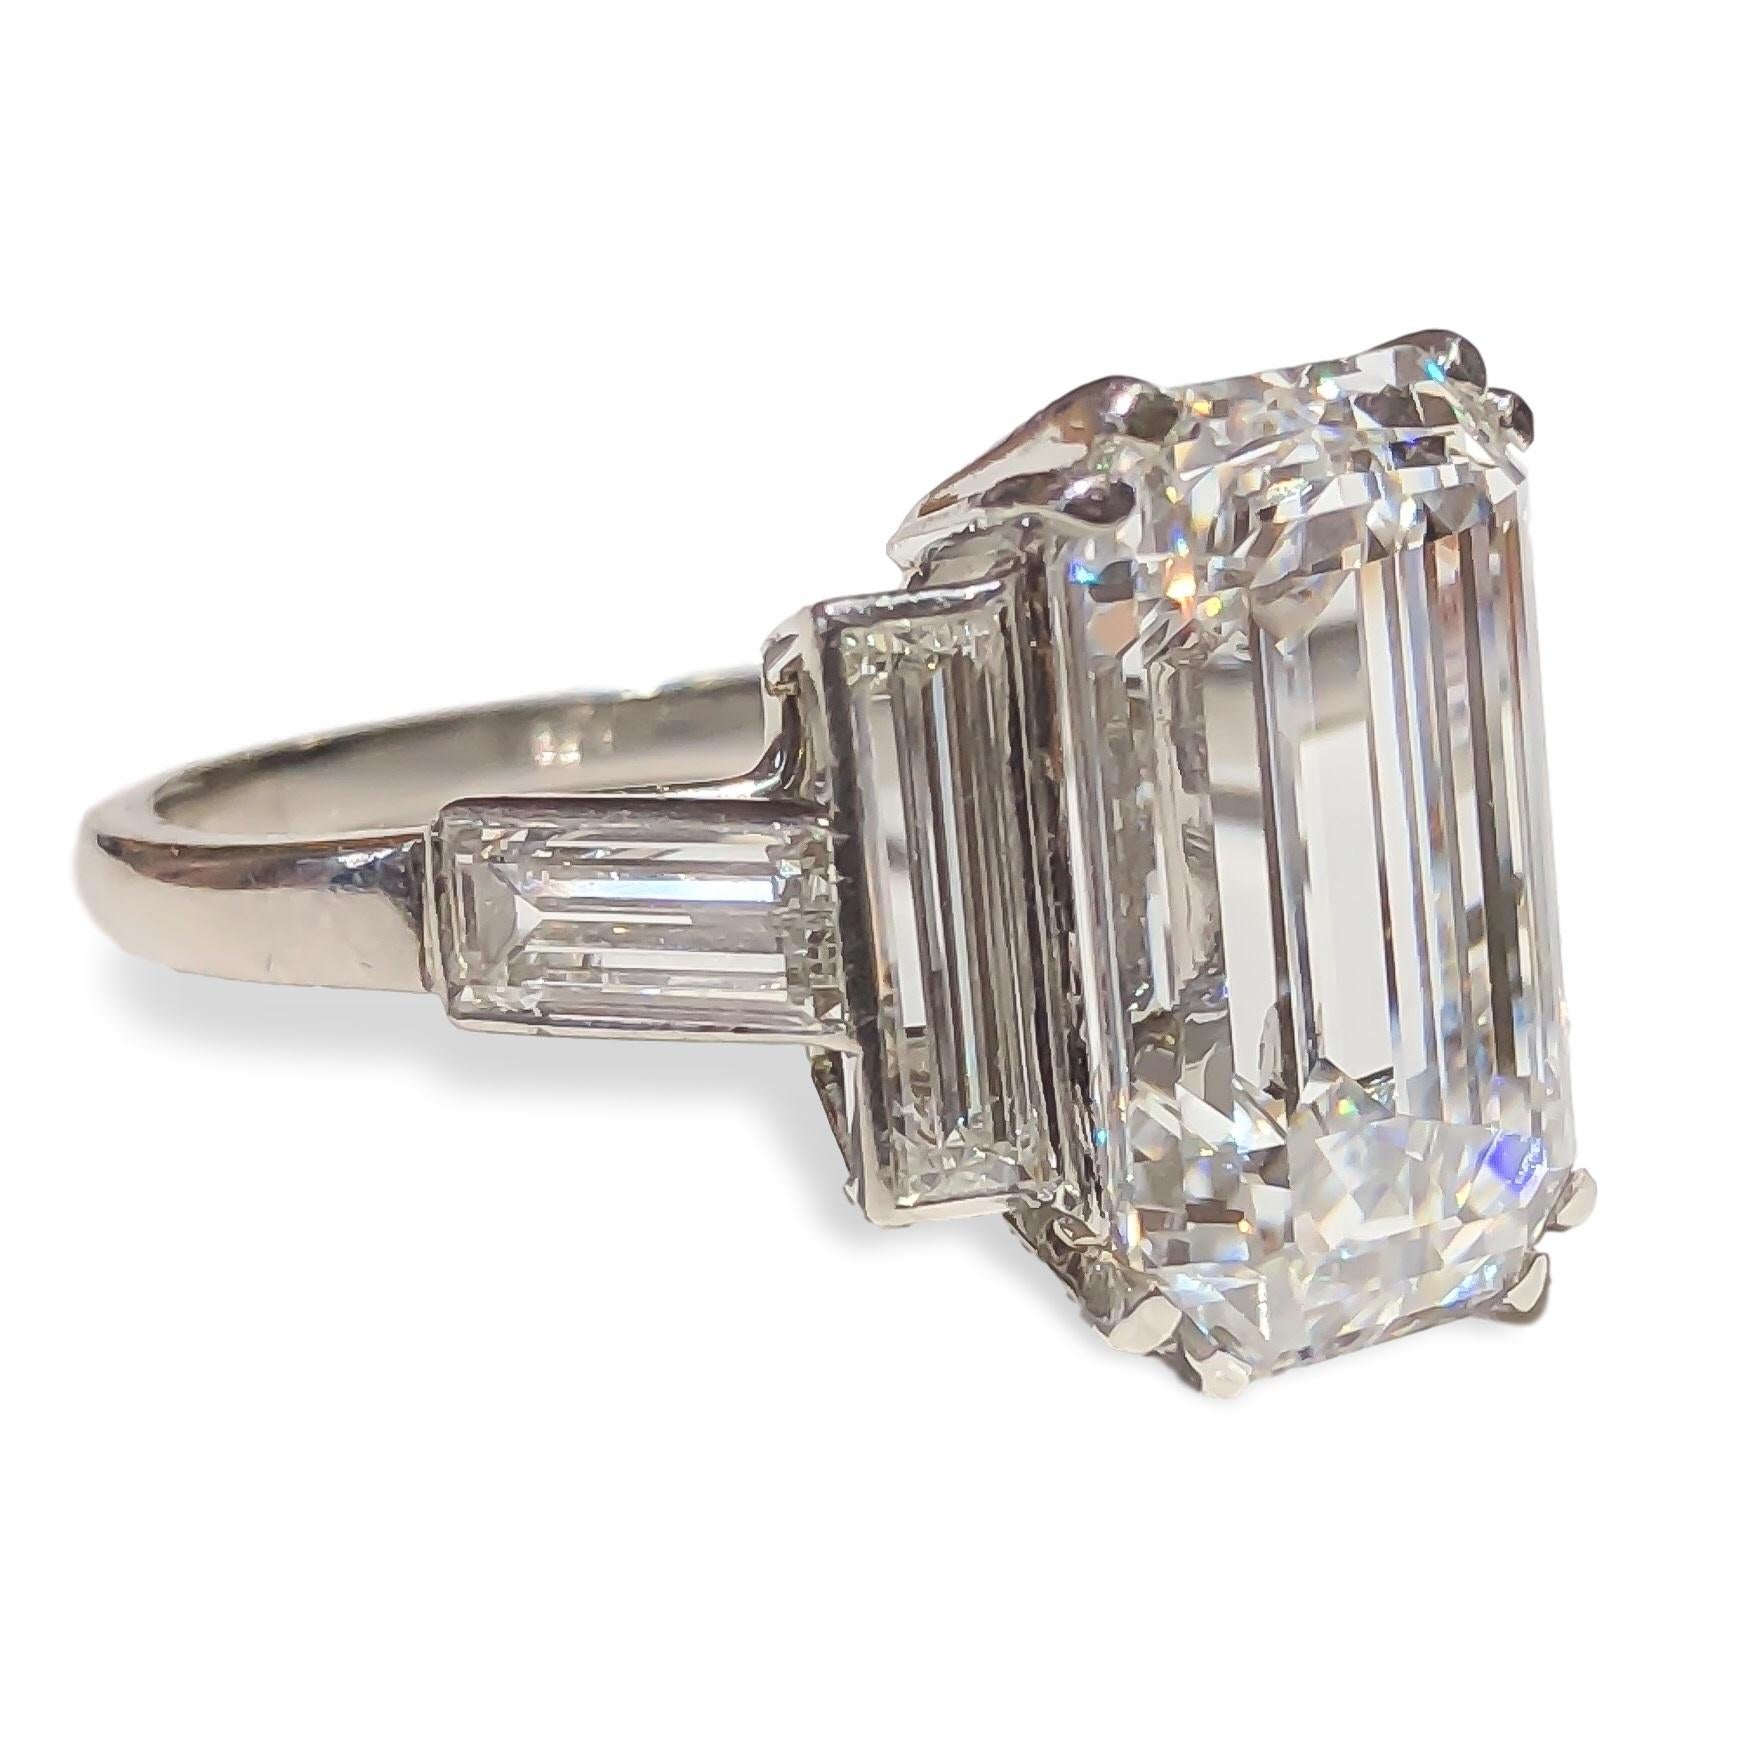 This exquisite diamond is set in an English art deco 1920's platinum Cartier setting with complementing emerald cut diamonds. Timeless and classic design, the center is set in double prongs and flanked by four (4) bezel set emerald cut diamonds. The